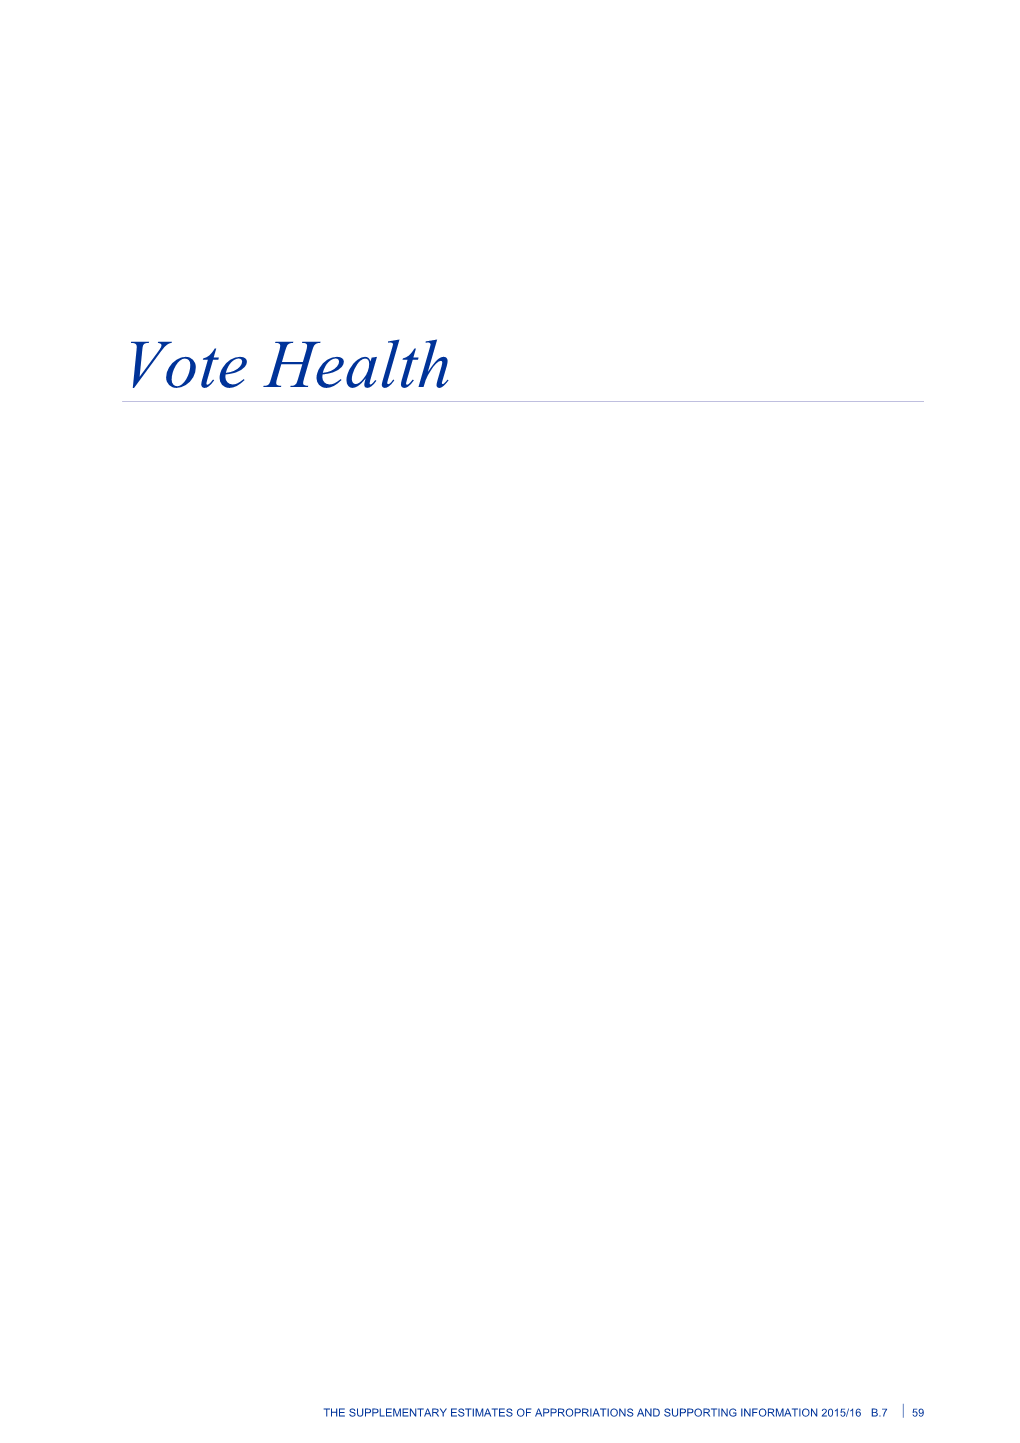 Vote Health - Supplementary Estimates of Appropriations 2015/16 - Budget 2016